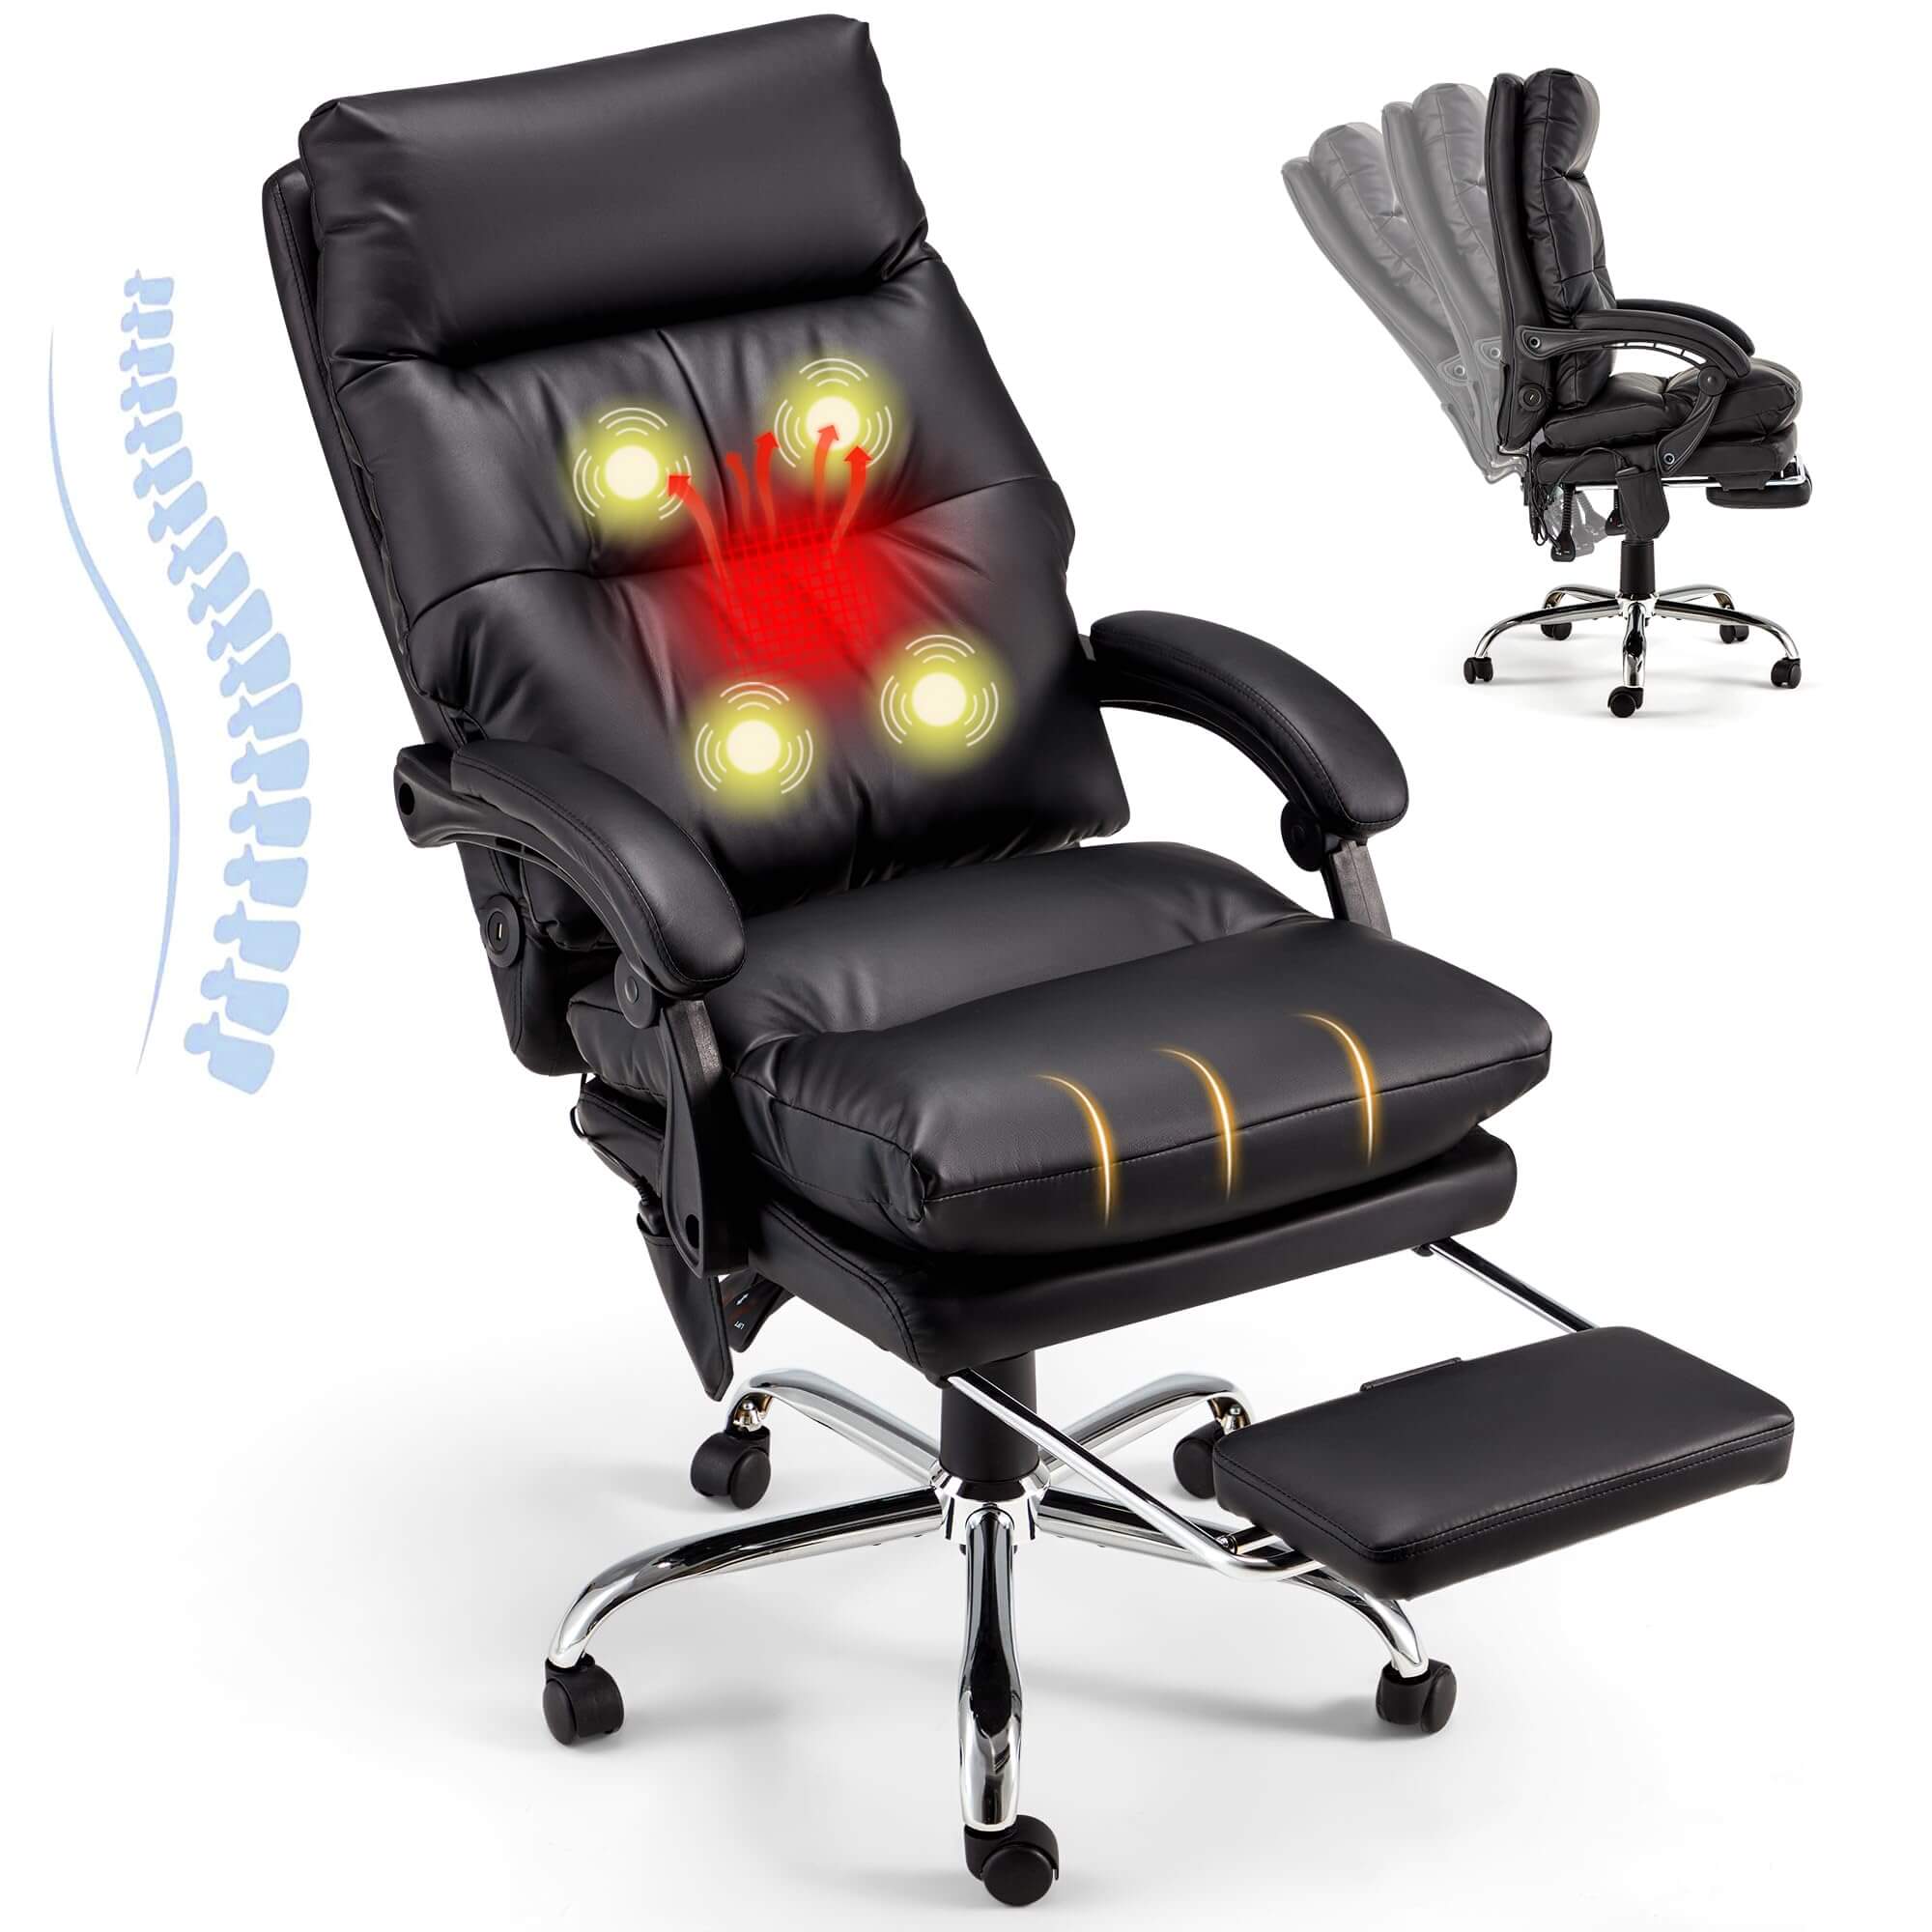 reclining-executive-office-chair-with-usb-port-comfortable-computer-desk-chair-with-footrest-pu-leather-black